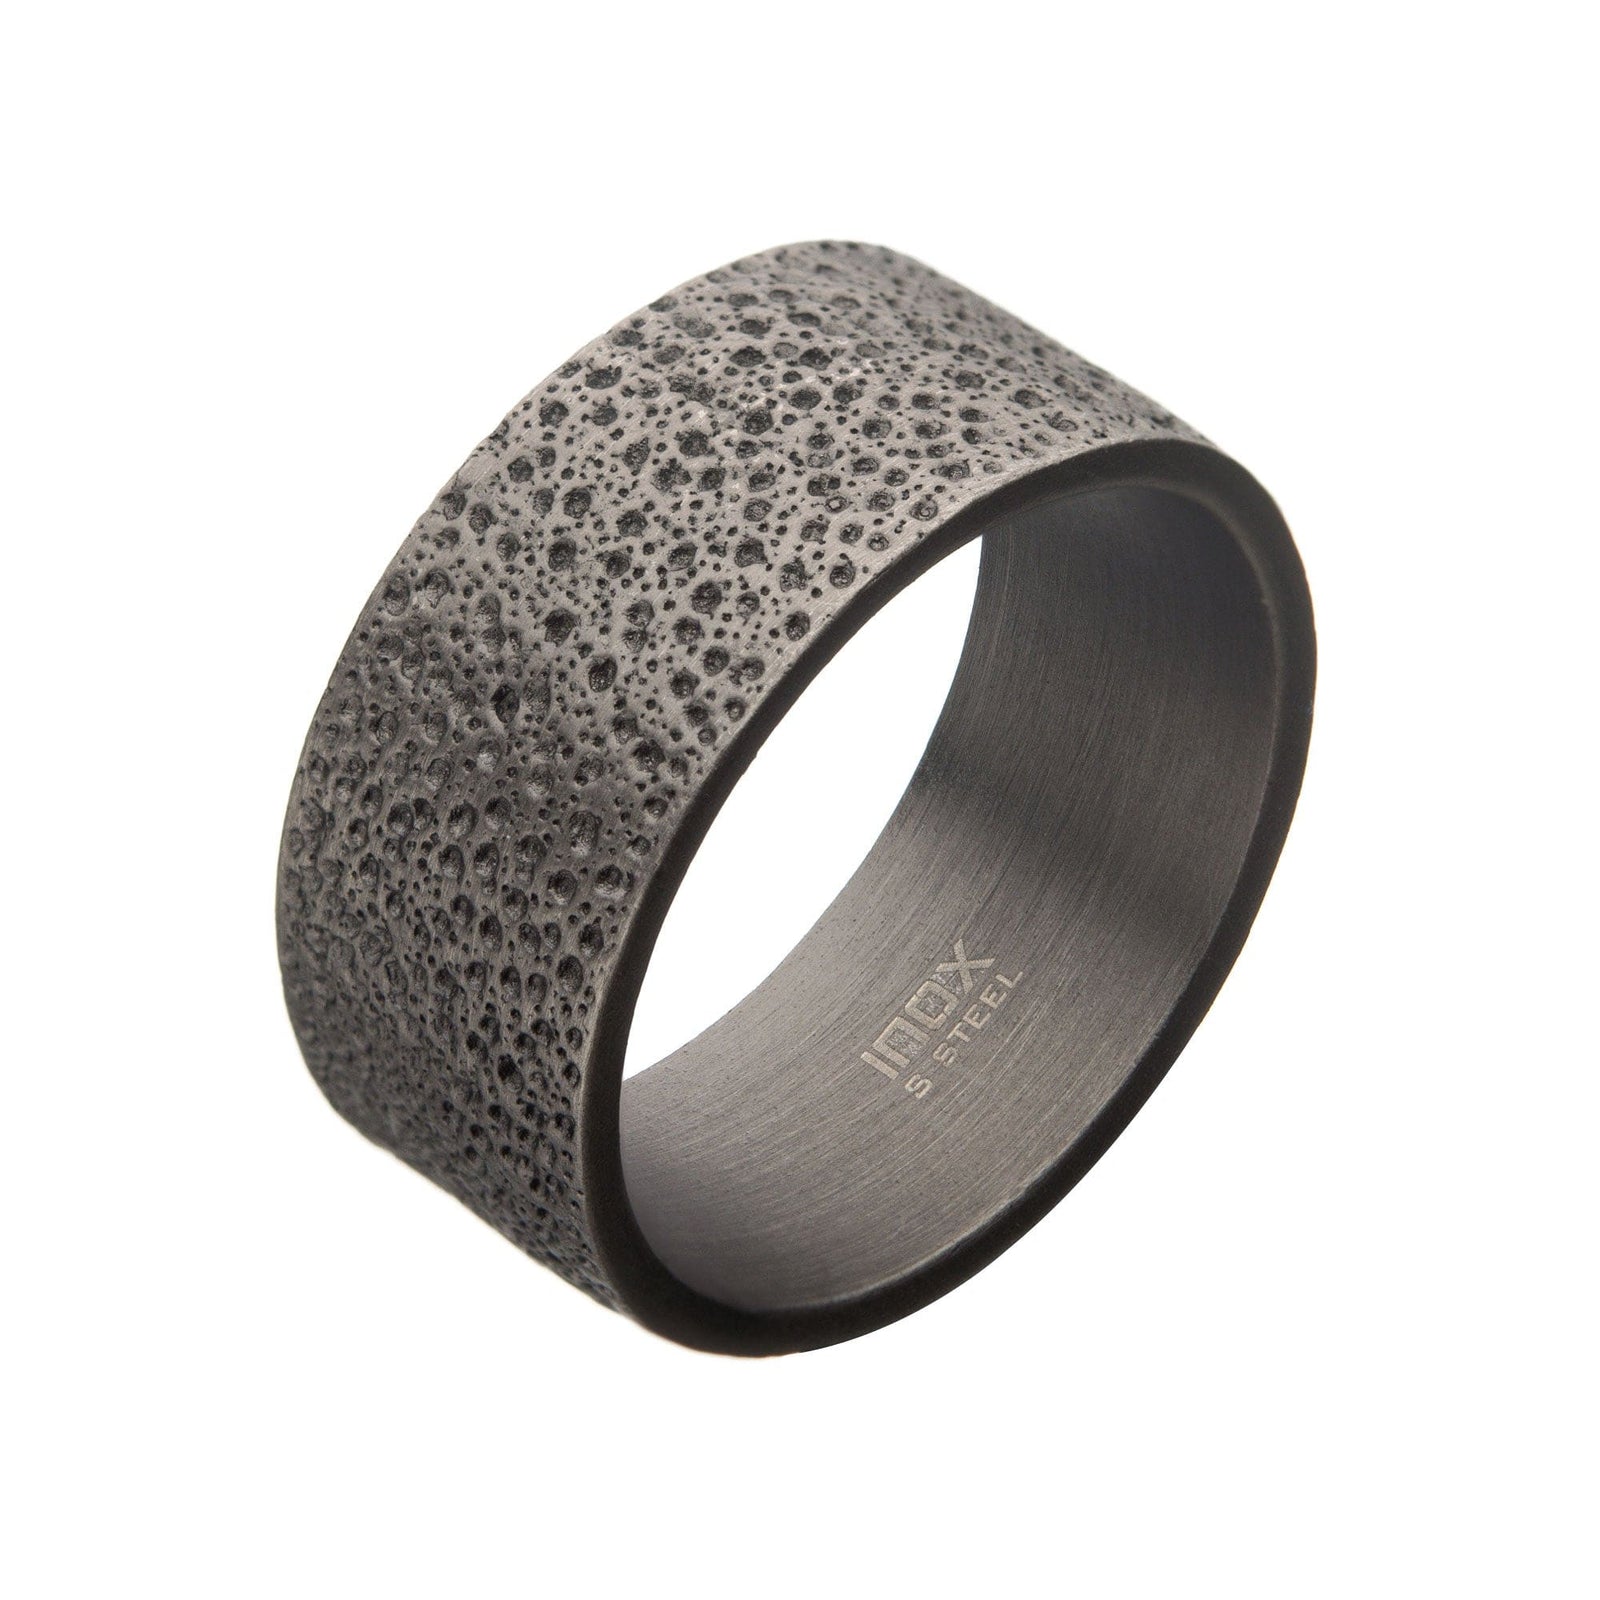 INOX JEWELRY Rings Silver Tone Stainless Steel Matte and Antique Finish Magma Pattern Band Ring